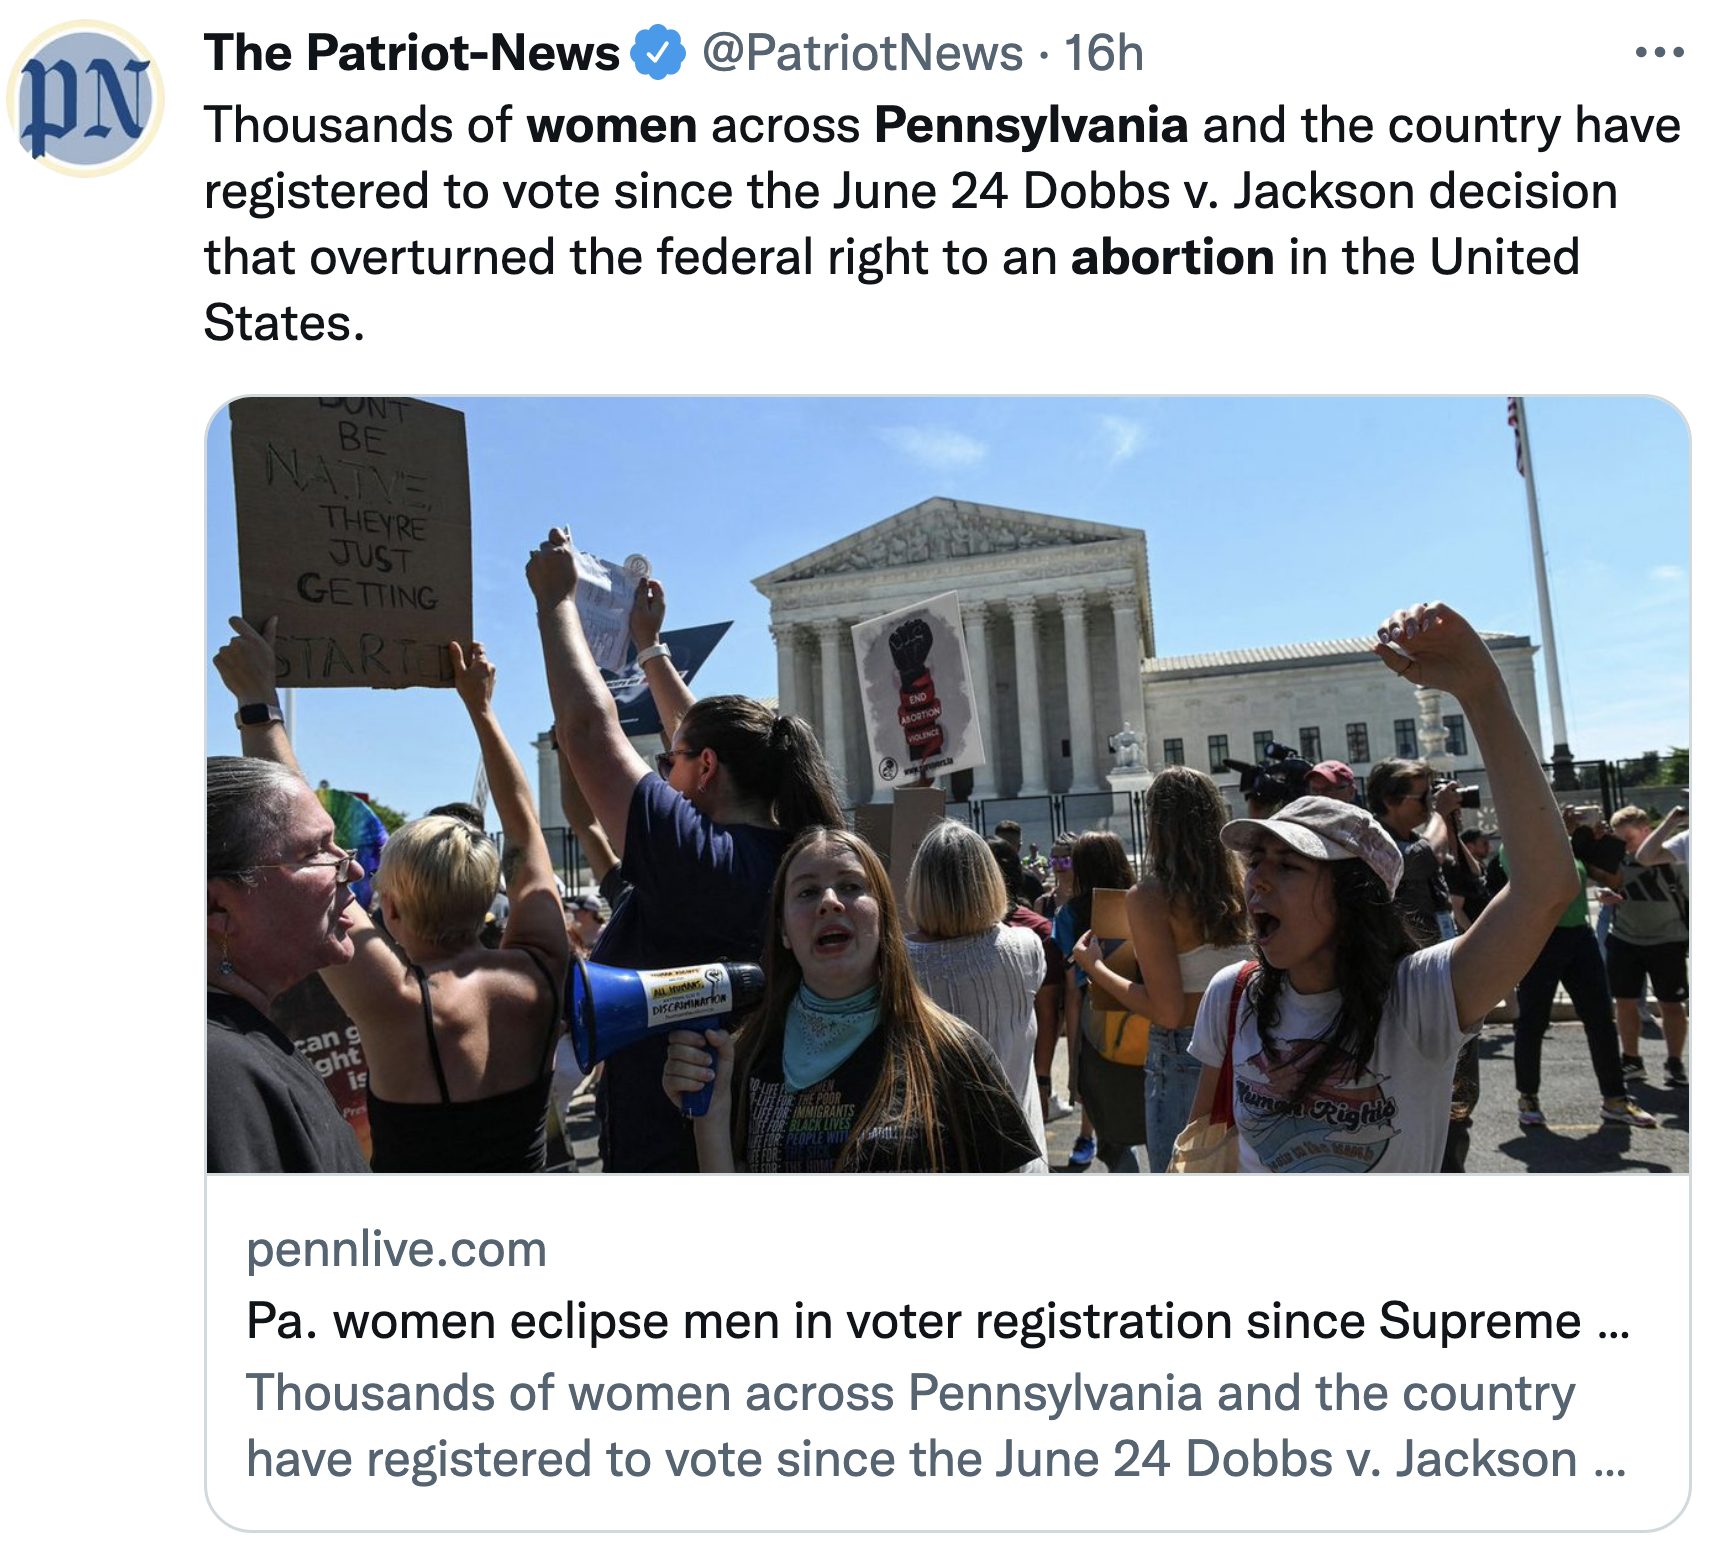 Screen-Shot-2022-08-24-at-9.00.04-AM Voter Registration For Women Soars After SCOTUS Overturned Roe Abortion Featured Politics Top Stories Women's Rights 